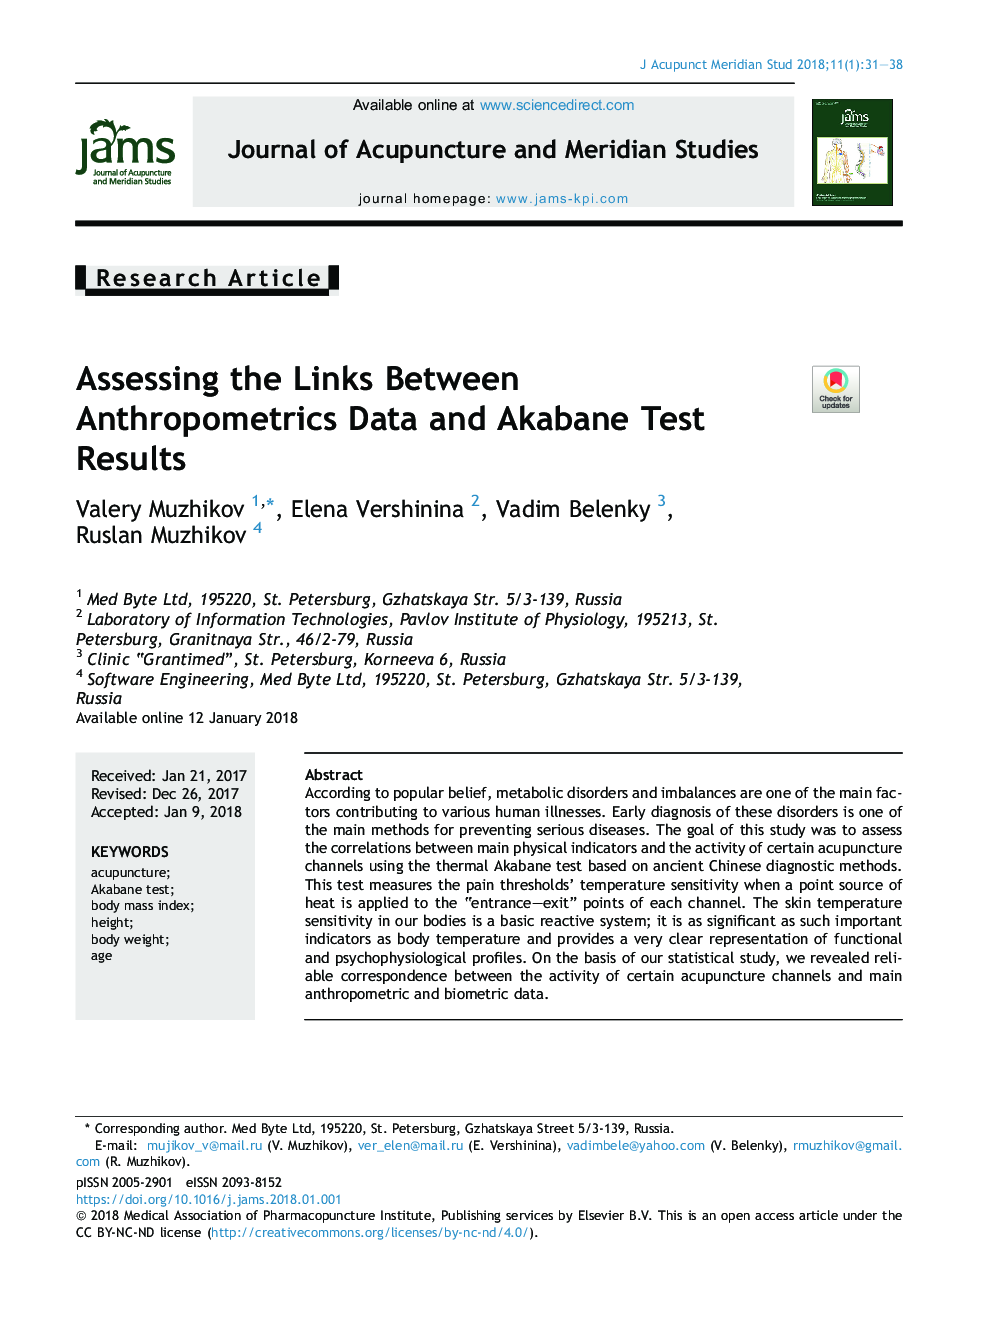 Assessing the Links Between Anthropometrics Data and Akabane Test Results